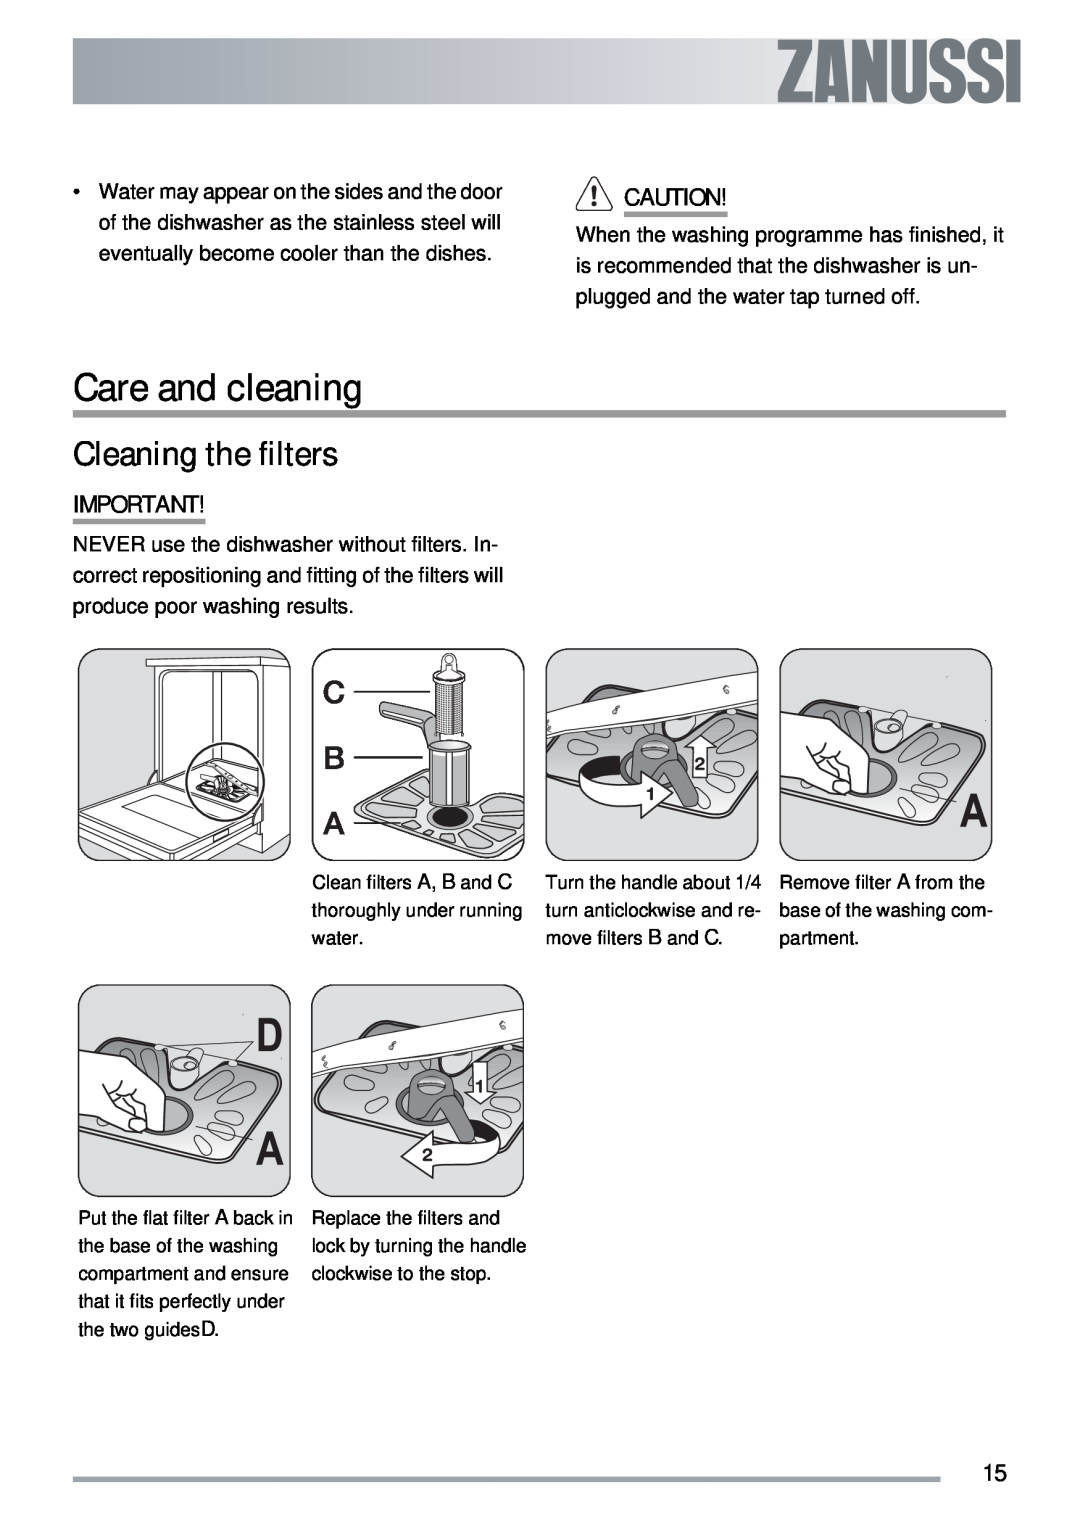 Zanussi ZDI 122 user manual Care and cleaning, Cleaning the filters 